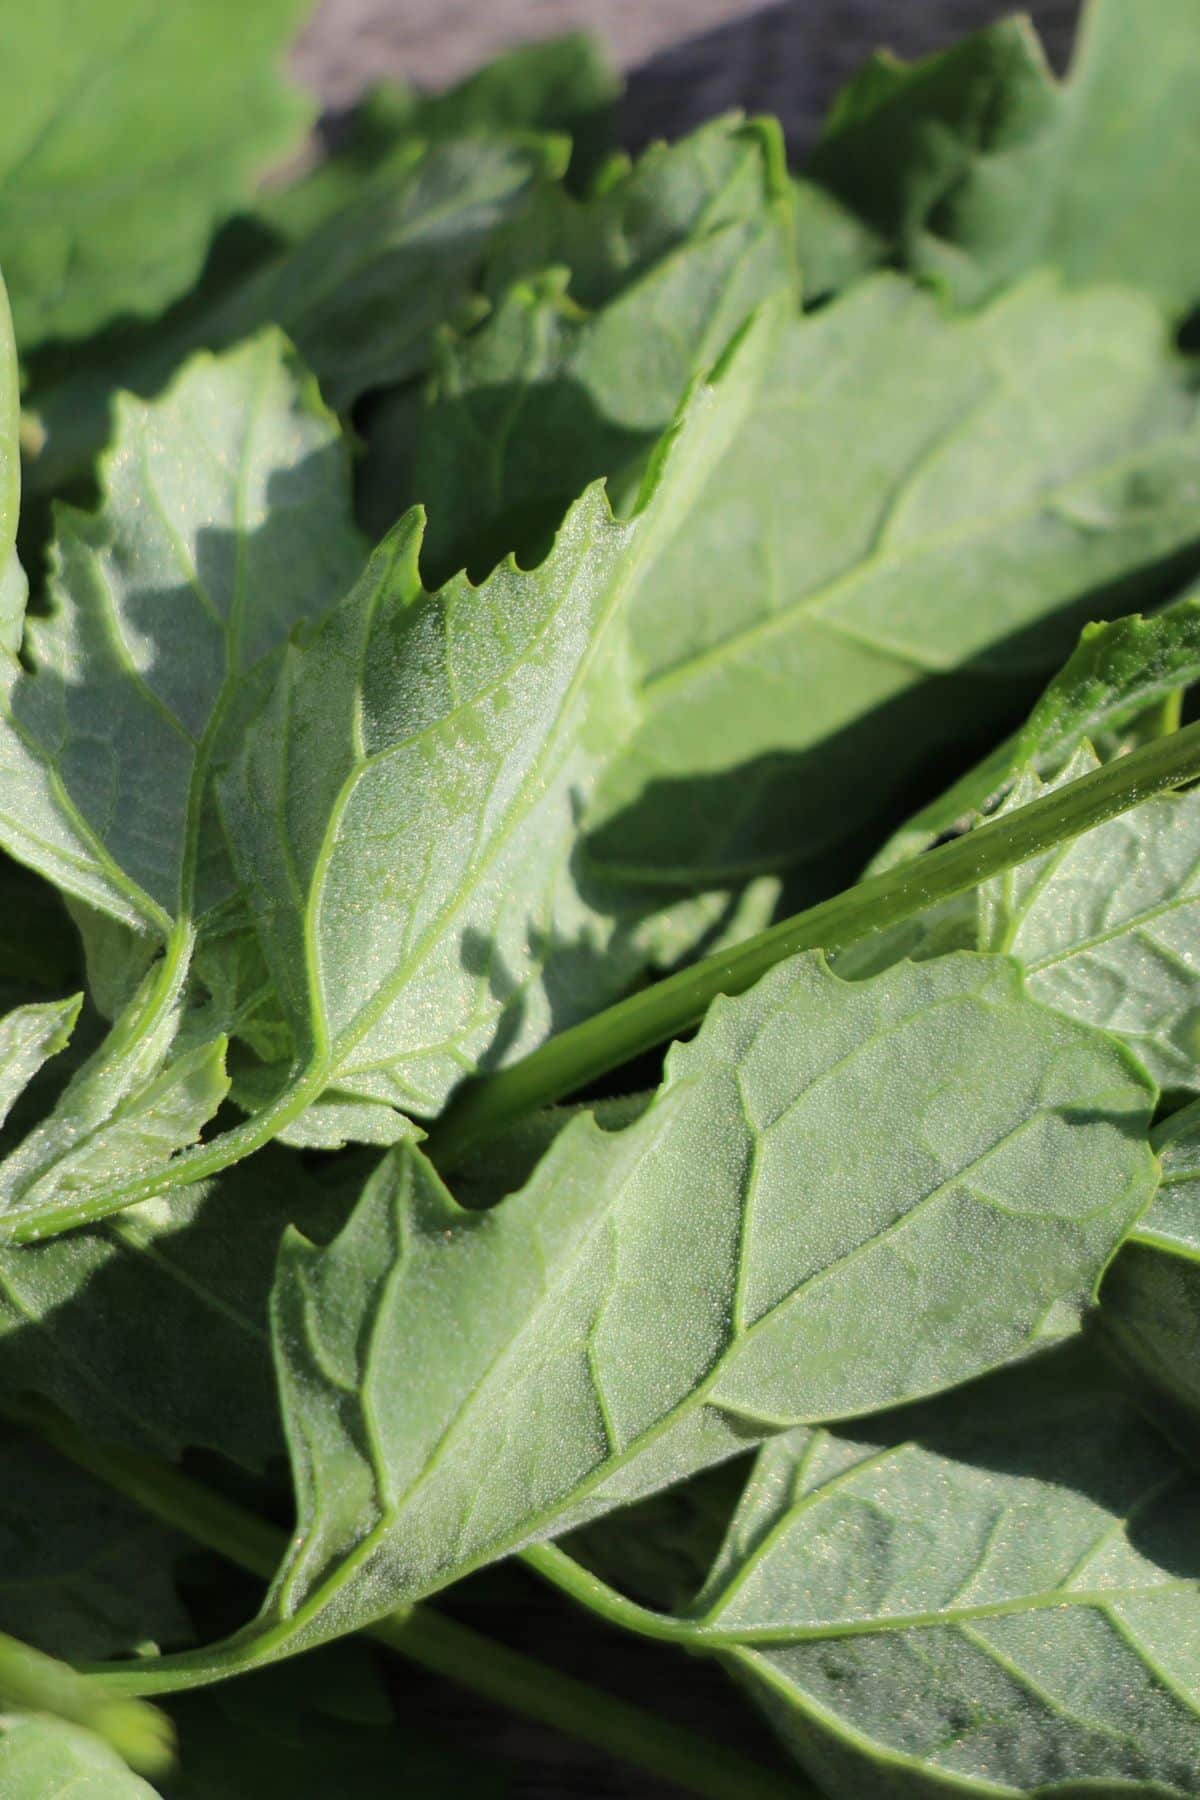 a close-up of the lambsquarters plant.